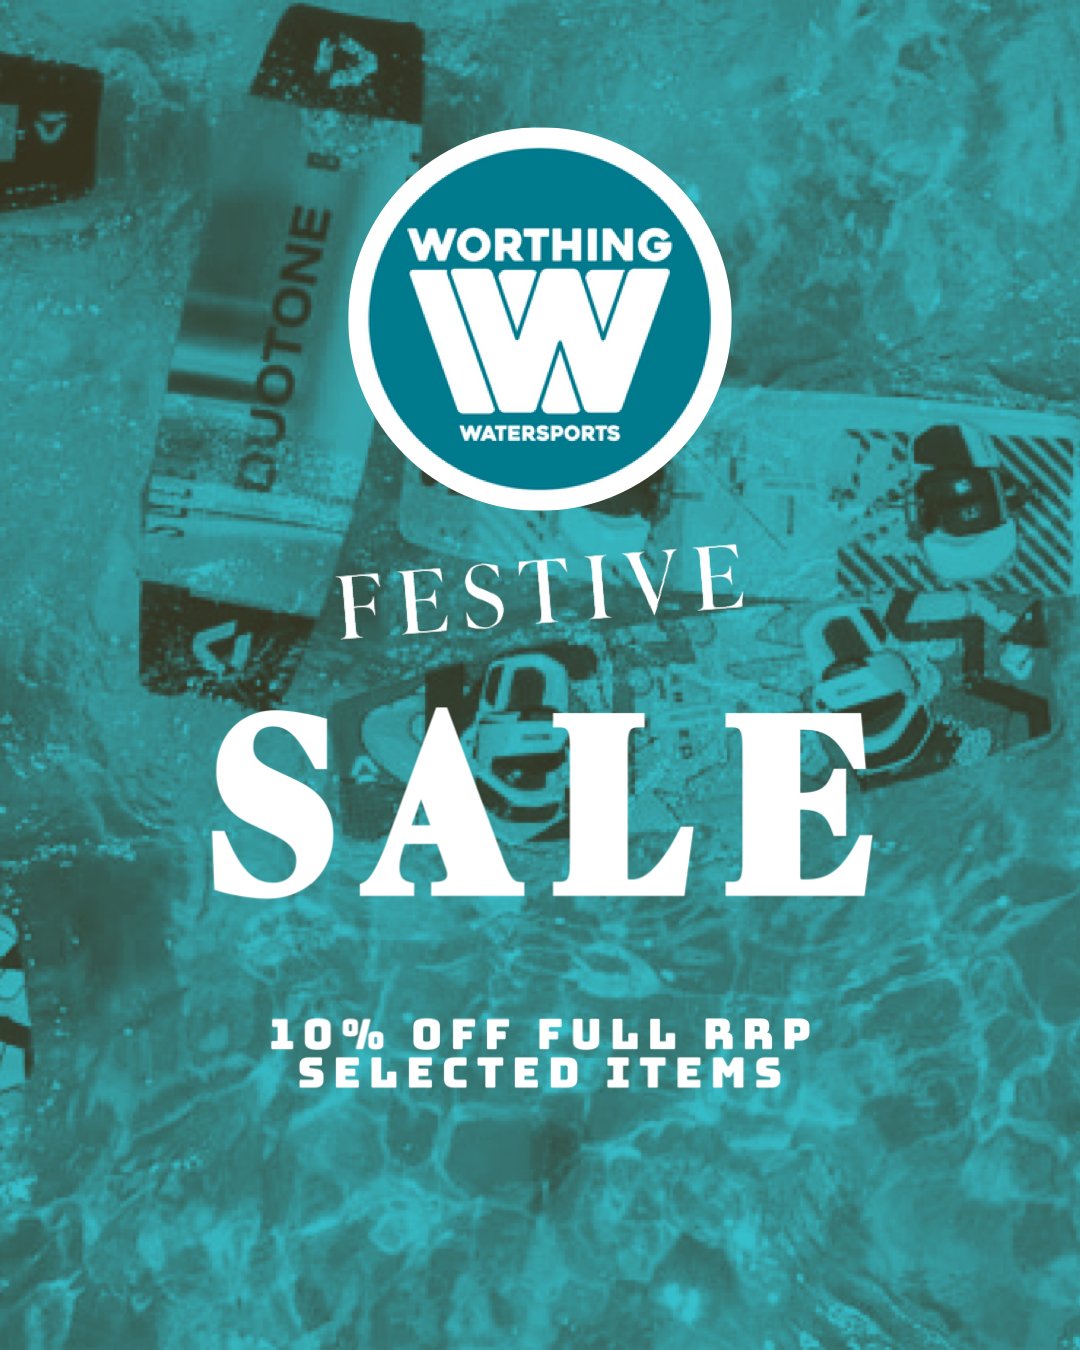 10% OFF FULL RRP ITEMS - Worthing Watersports